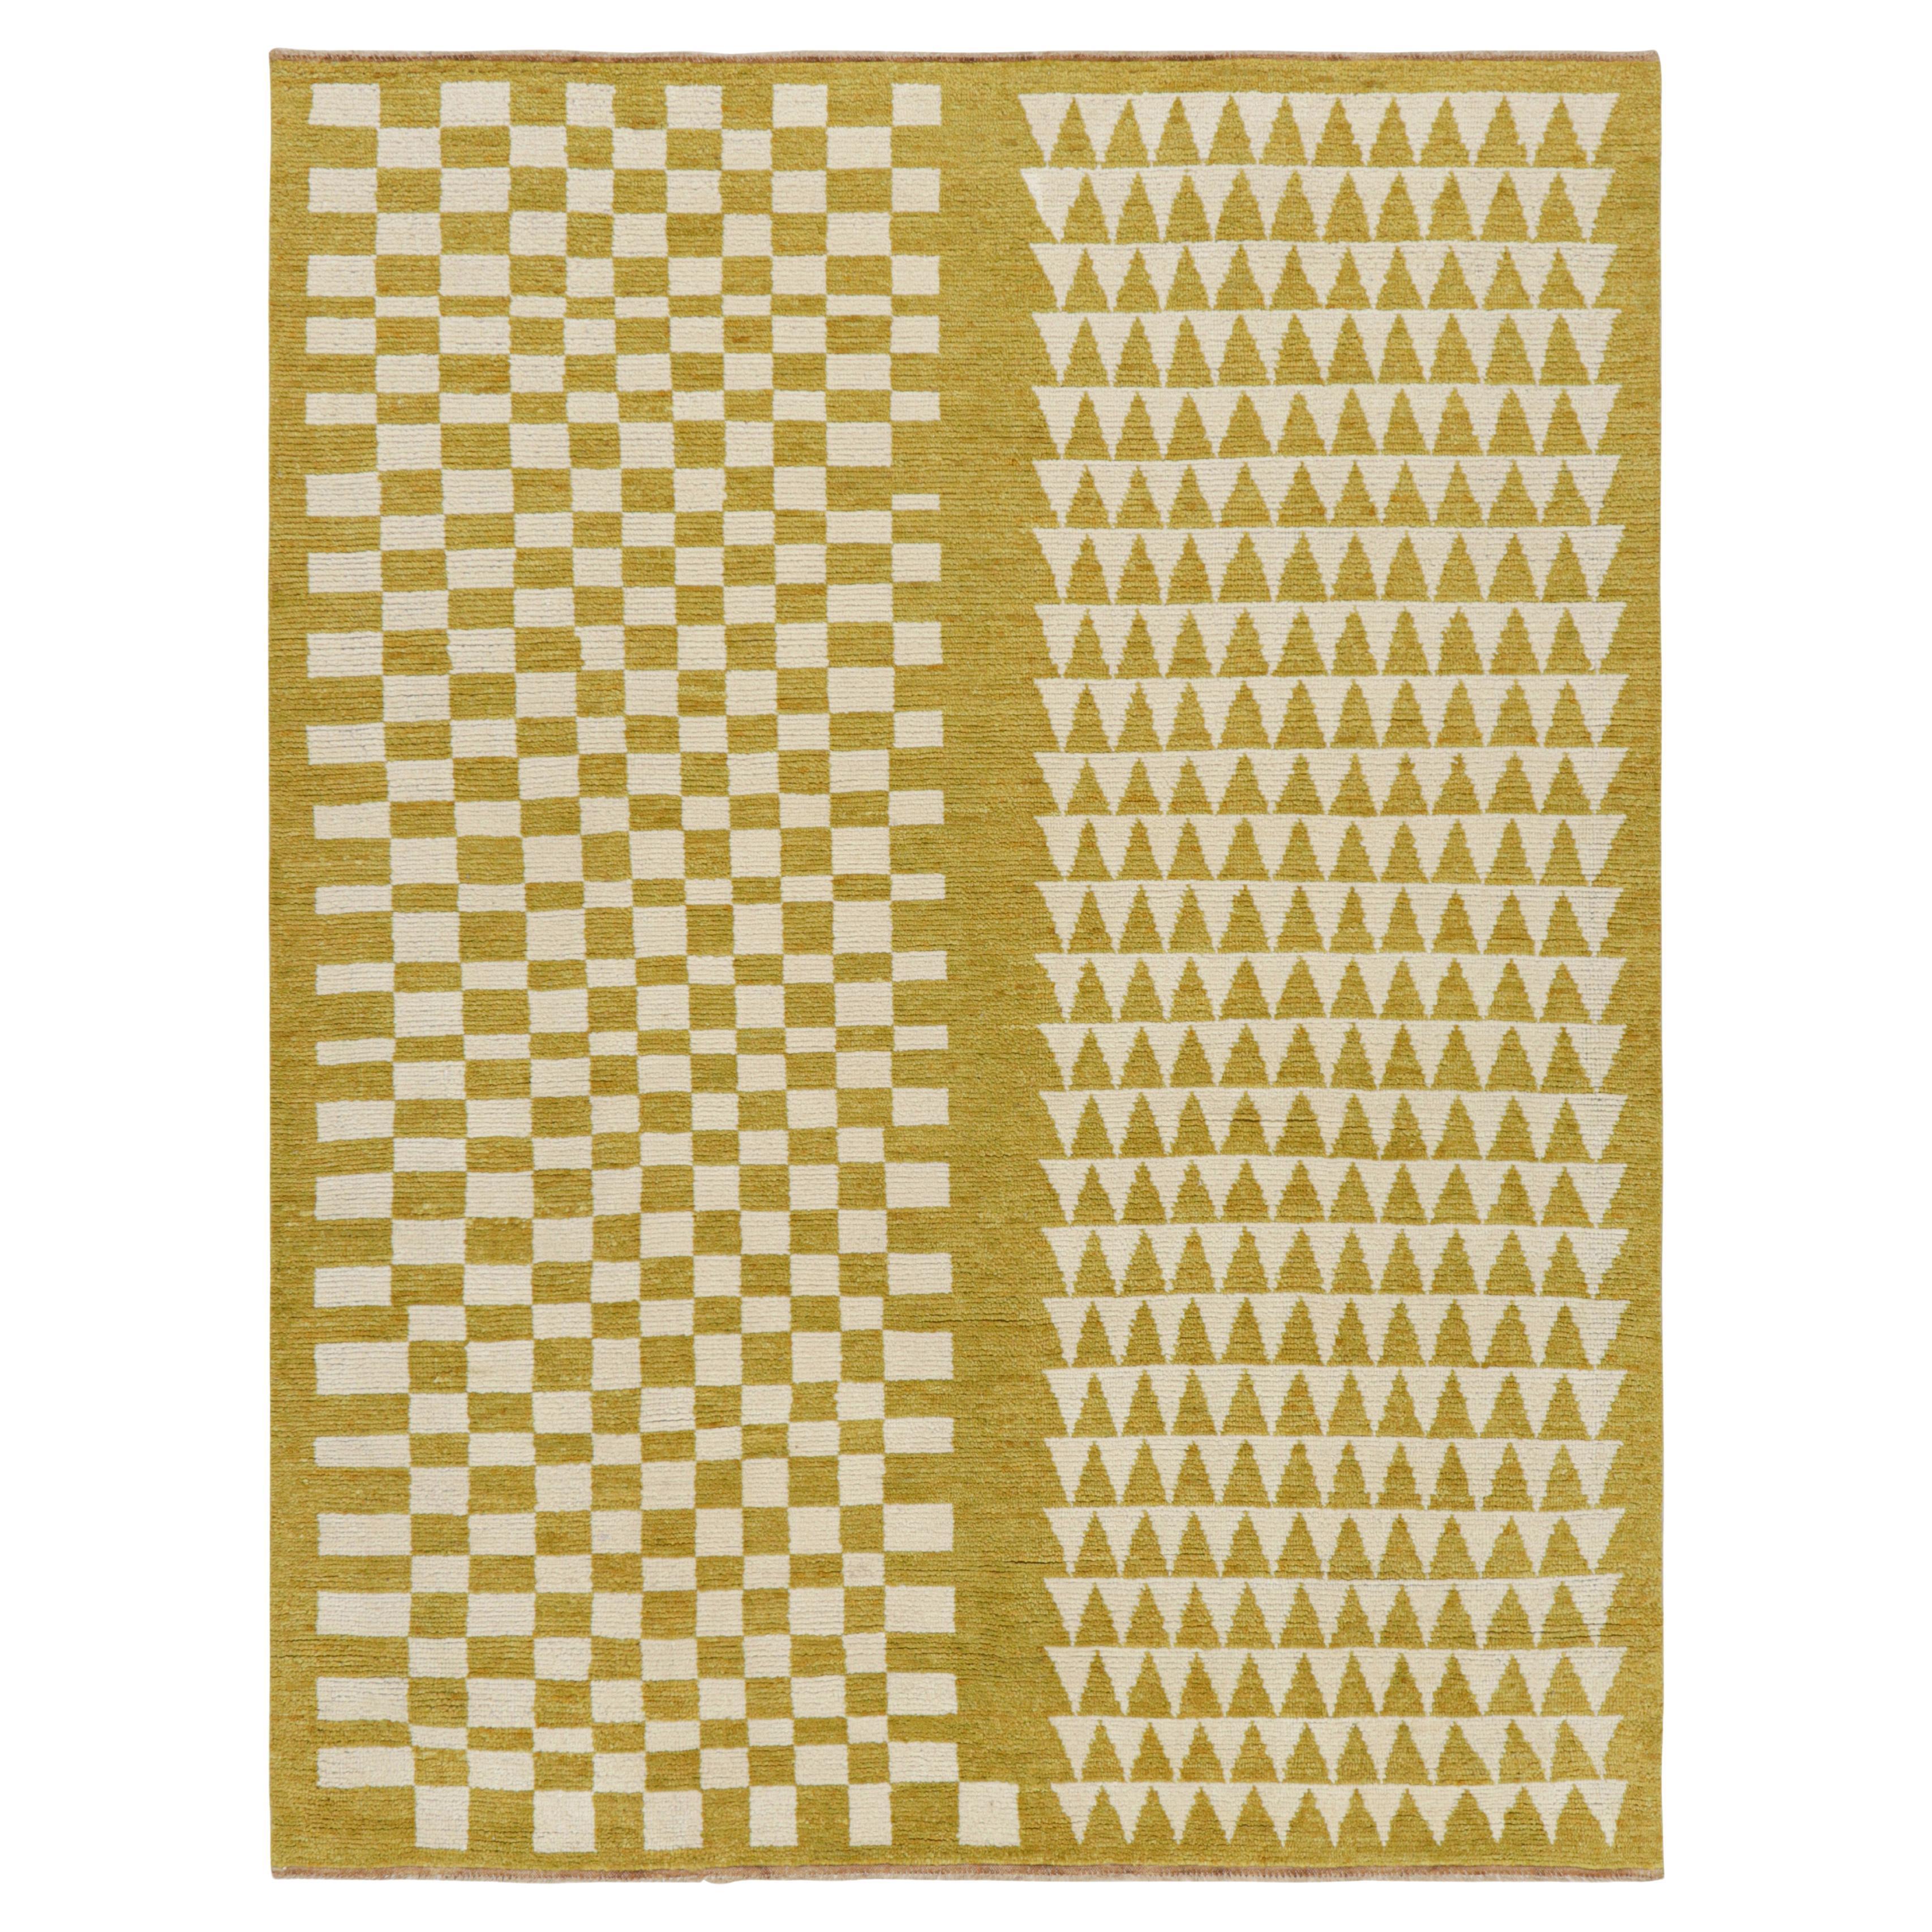 Rug & Kilim’s Moroccan Style Rug with Gold and Beige Patterns For Sale